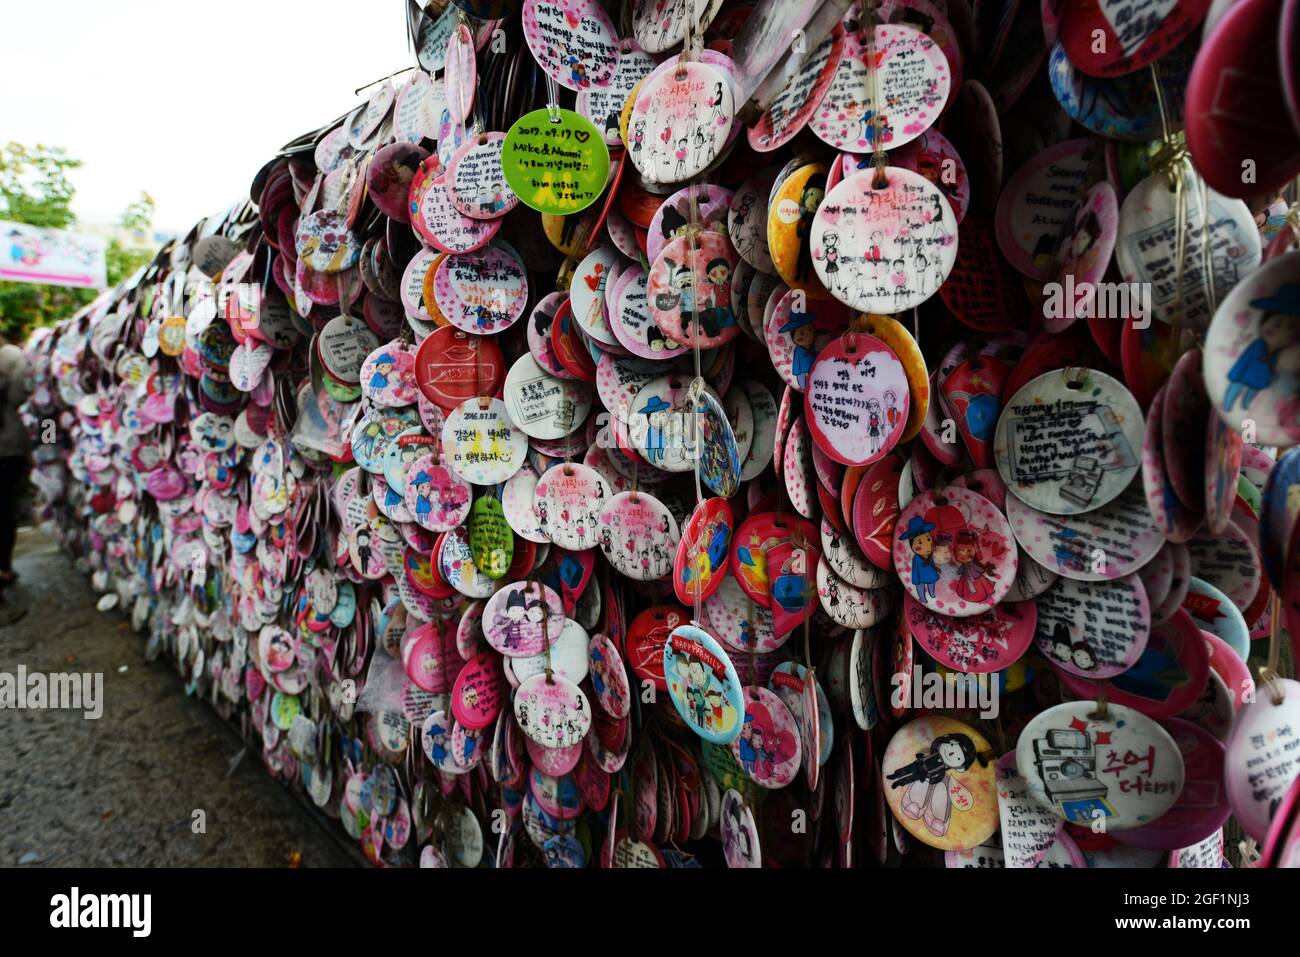 Love messages at a wall of love in Ssamziegil shopping complex, Insa-dong, Seoul, South Korea. Stock Photo